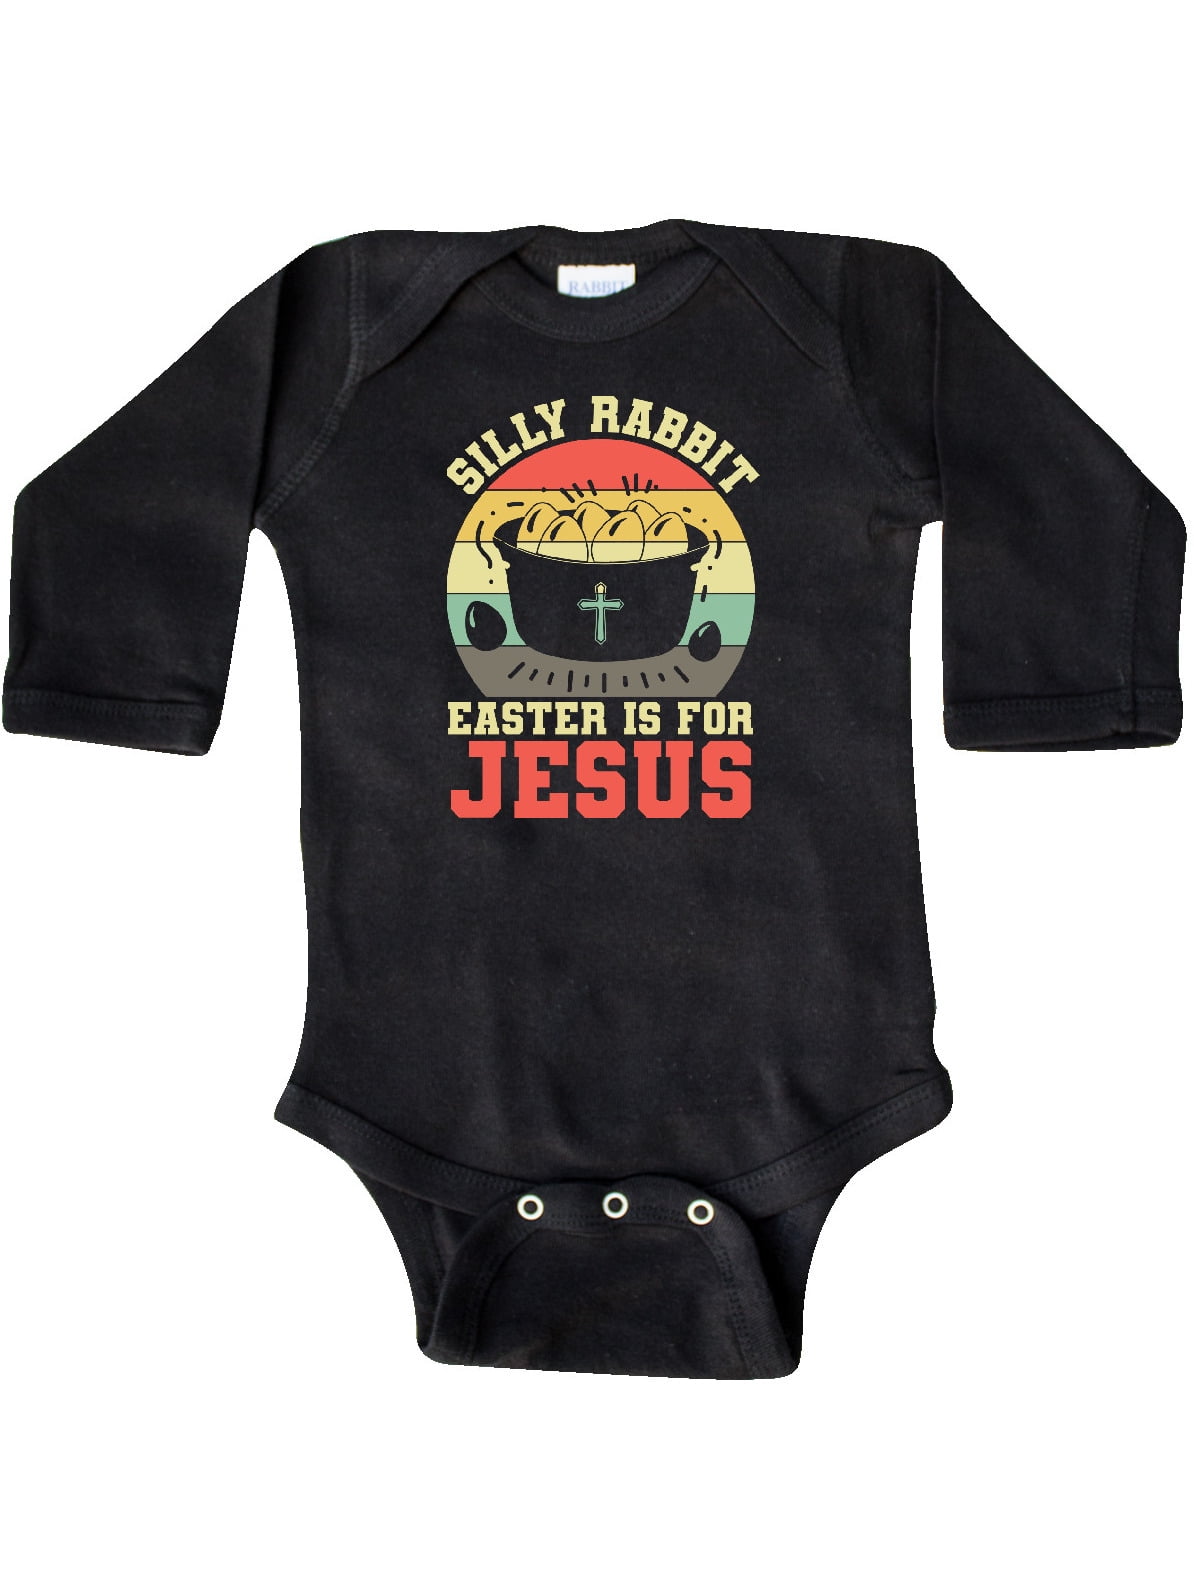 Cute Silly Rabbit Easter Is for Jesus Baby Short Sleeve Bodysuit 